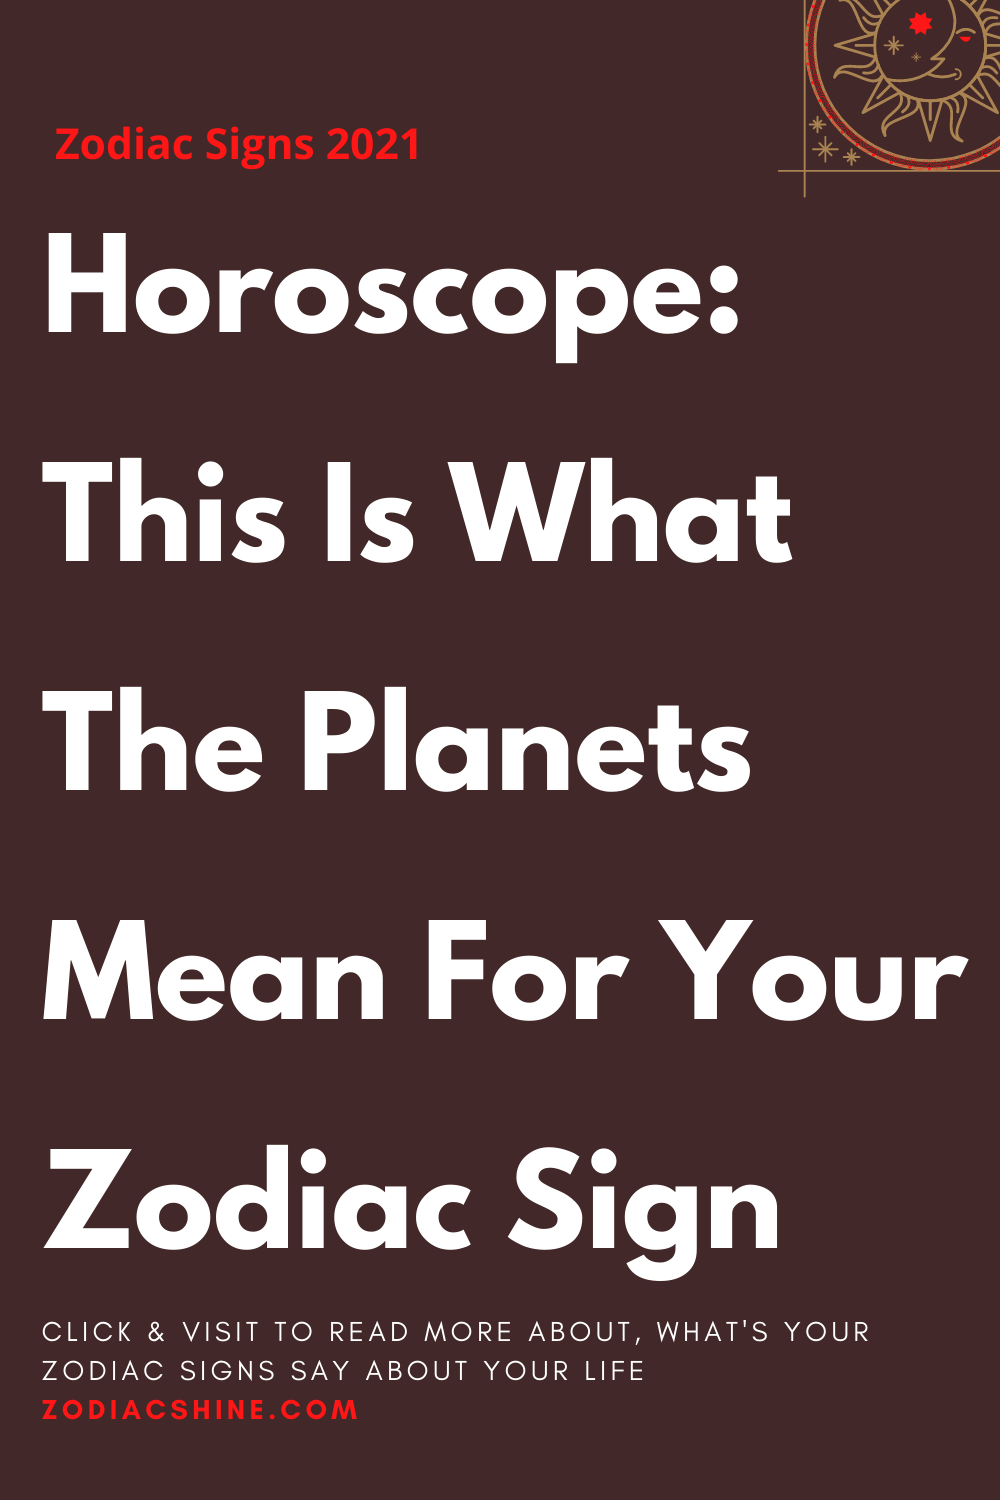 Horoscope: This is what the planets mean for your zodiac sign